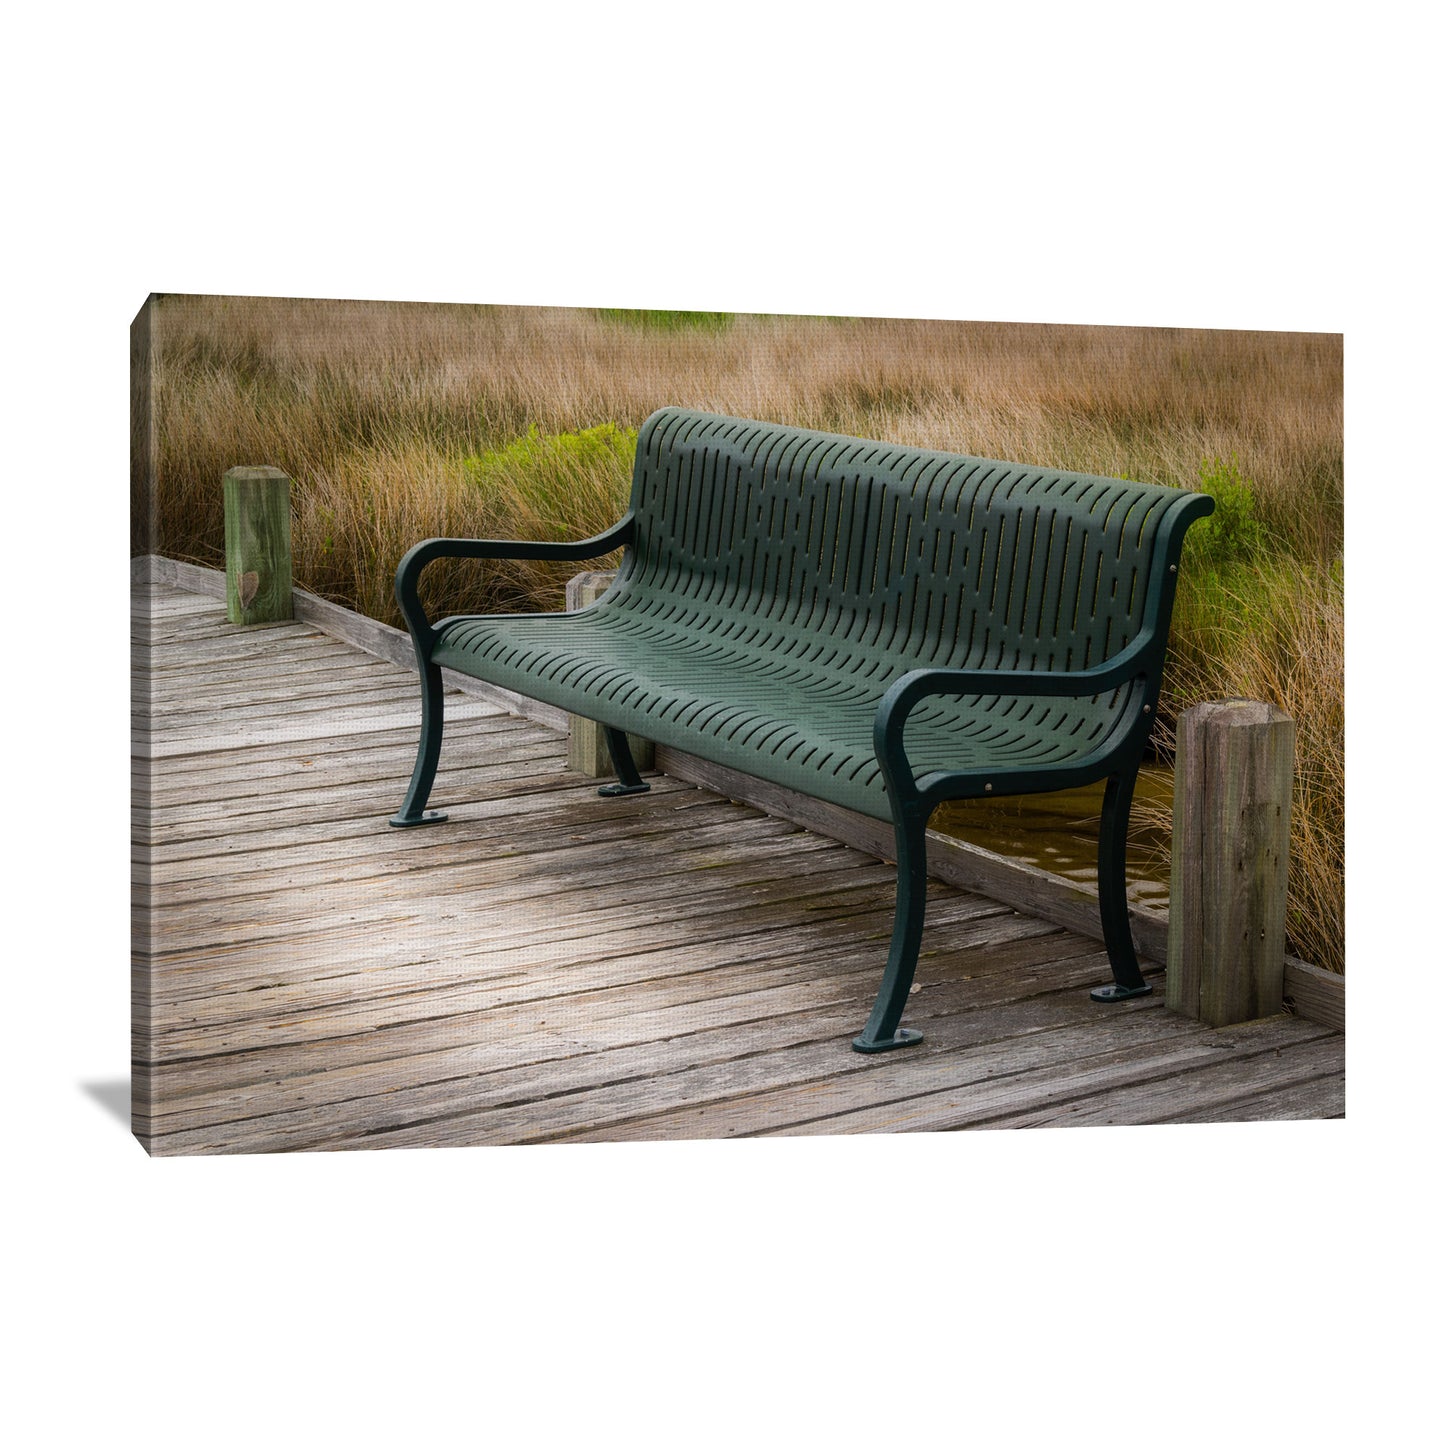 Canvas art captures the tranquility of a coastal boardwalk with a seaside bench and the natural backdrop of swaying seagrasses."